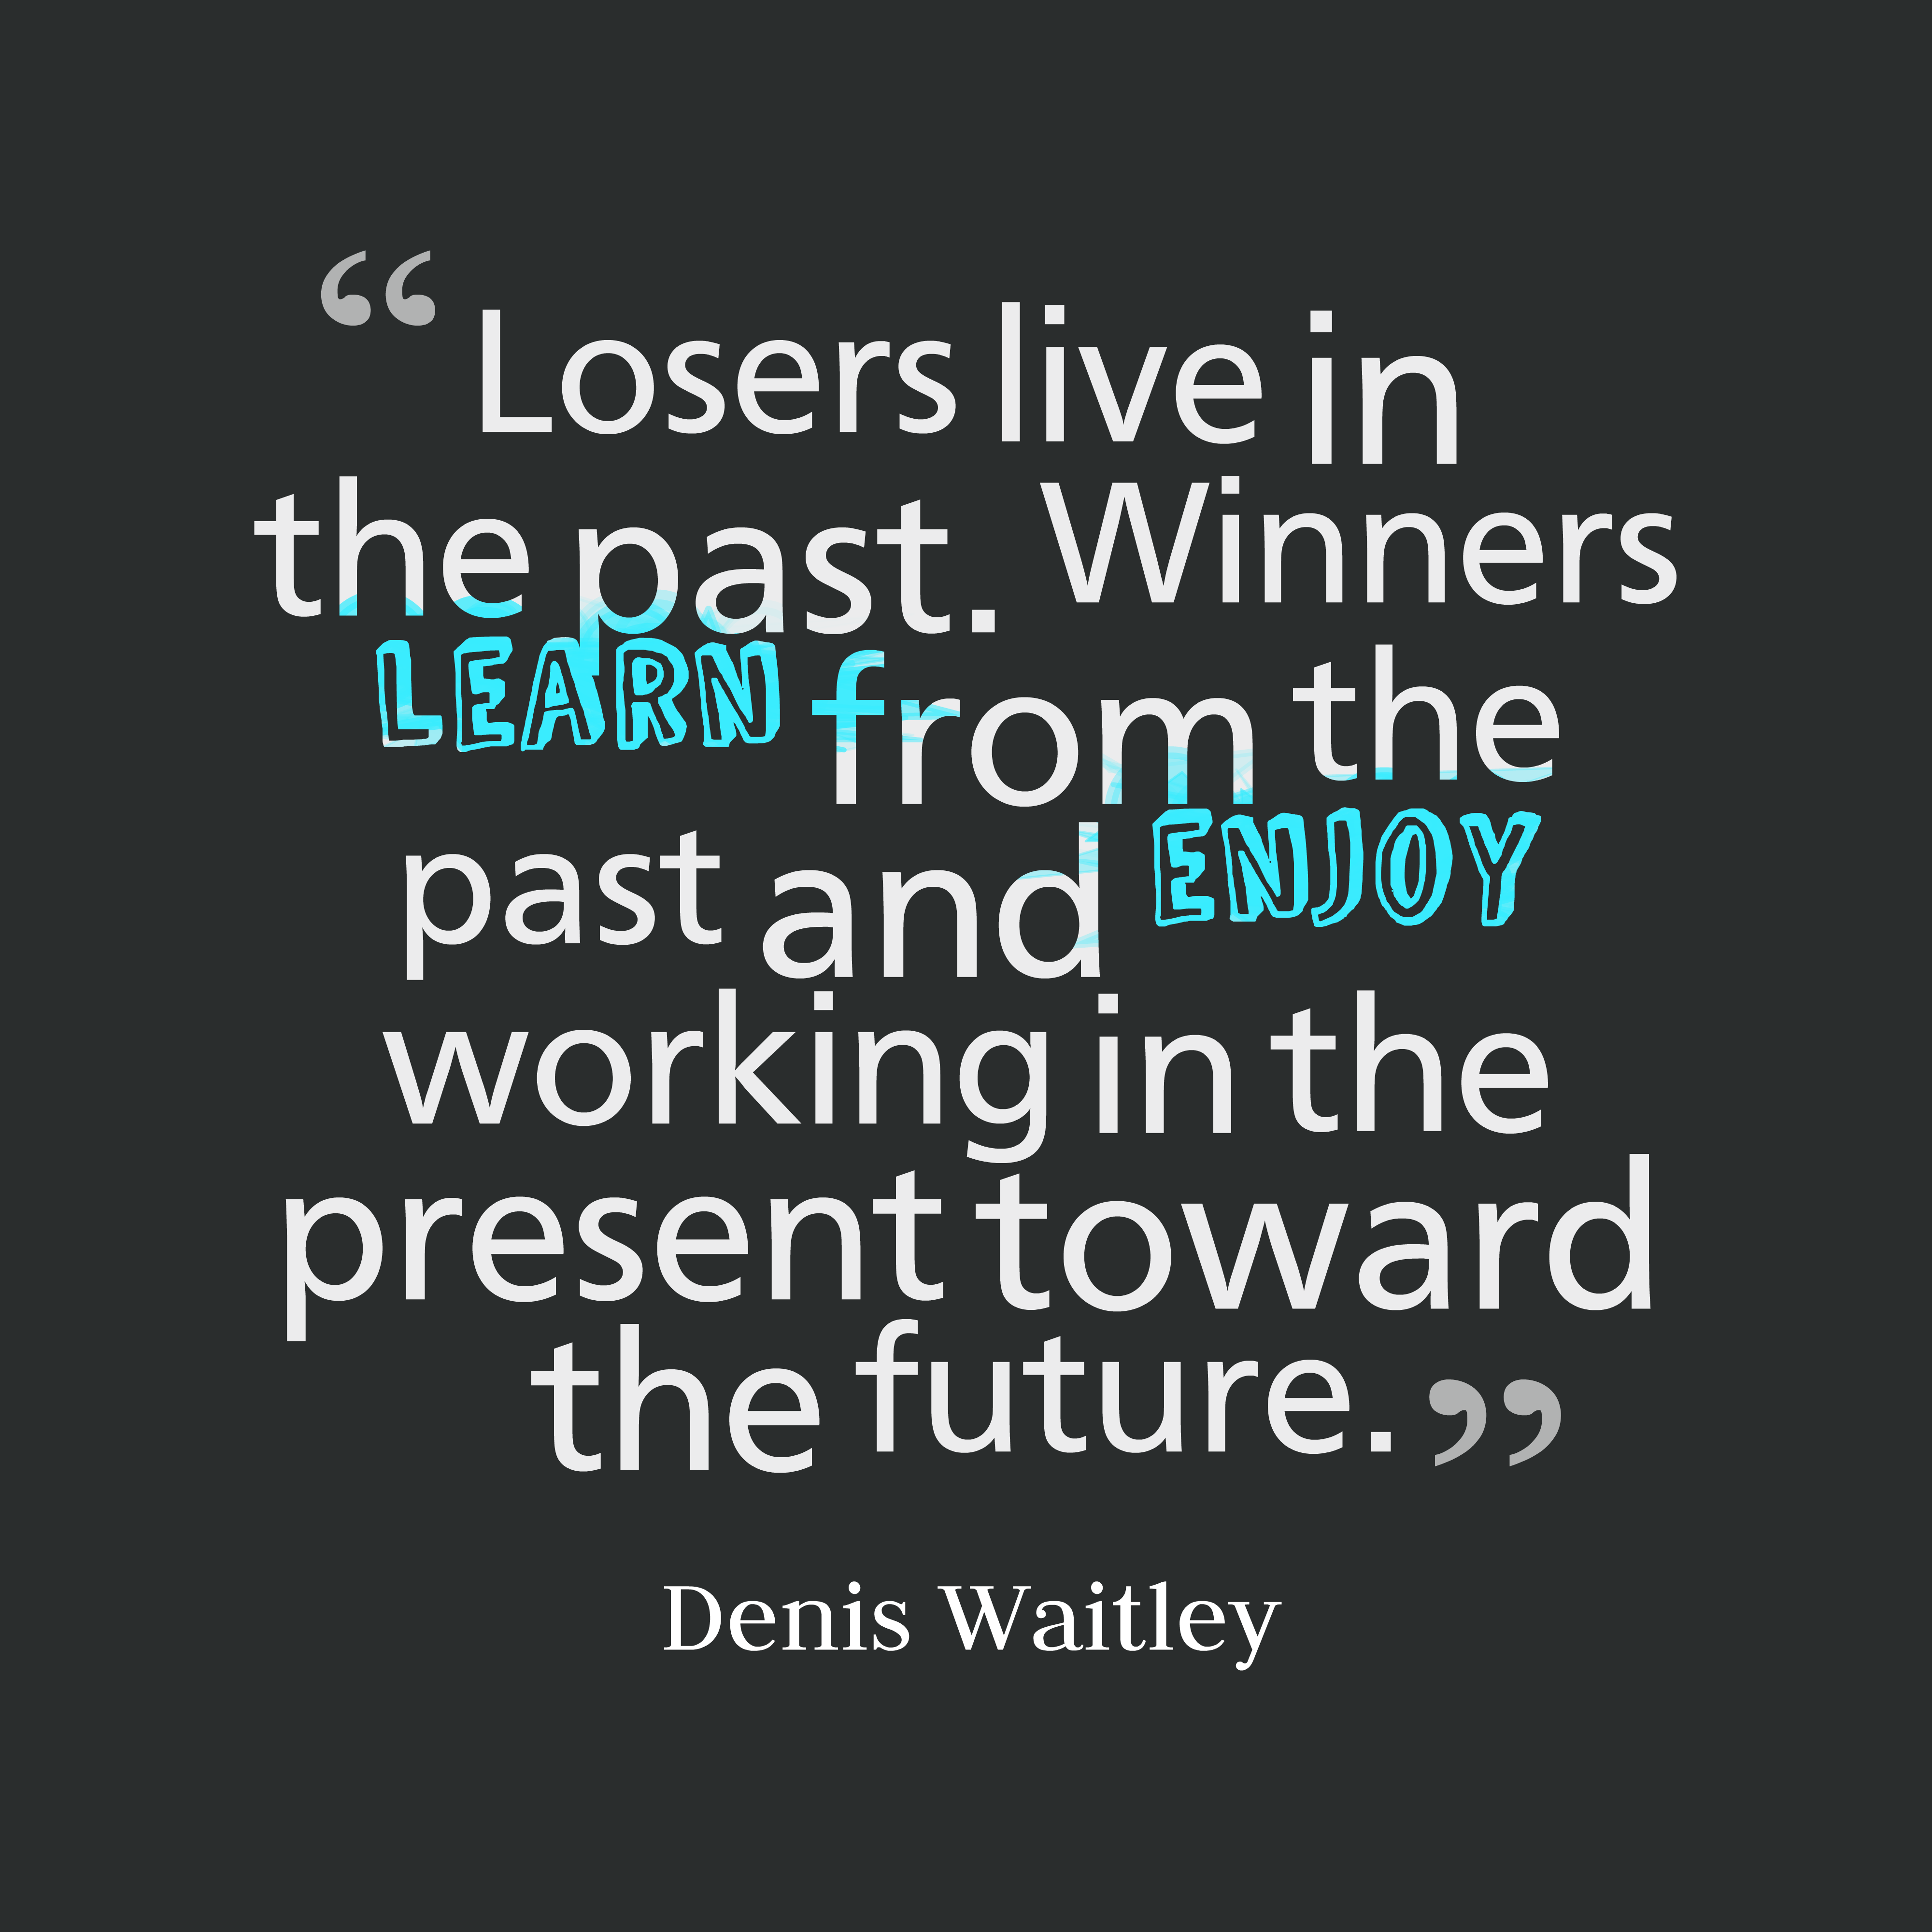 Losers live in the past. Winners learn from the past and enjoy working in the present toward the future. Denis Waitley